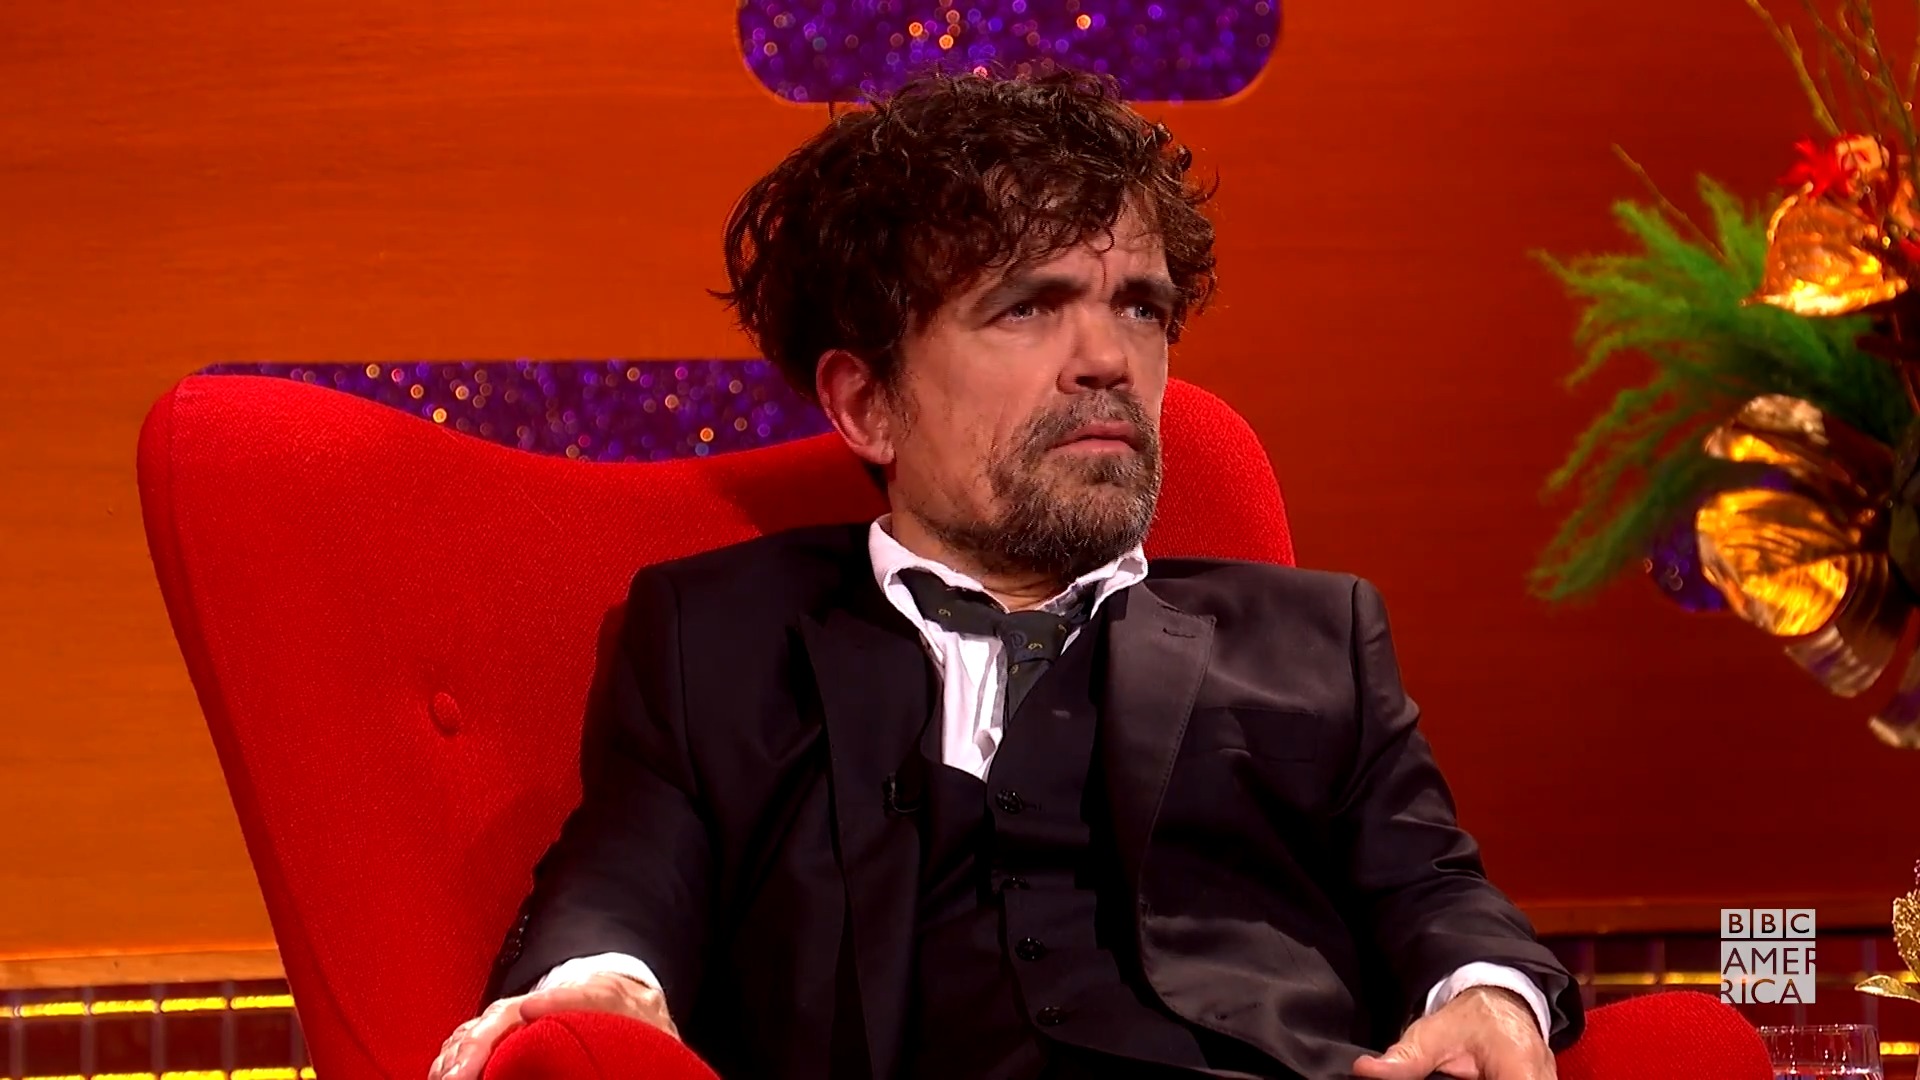 Watch Peter Dinklage on Not Being A “Fighter Guy” on ‘Game of Thrones’  | The Graham Norton Show Video Extras